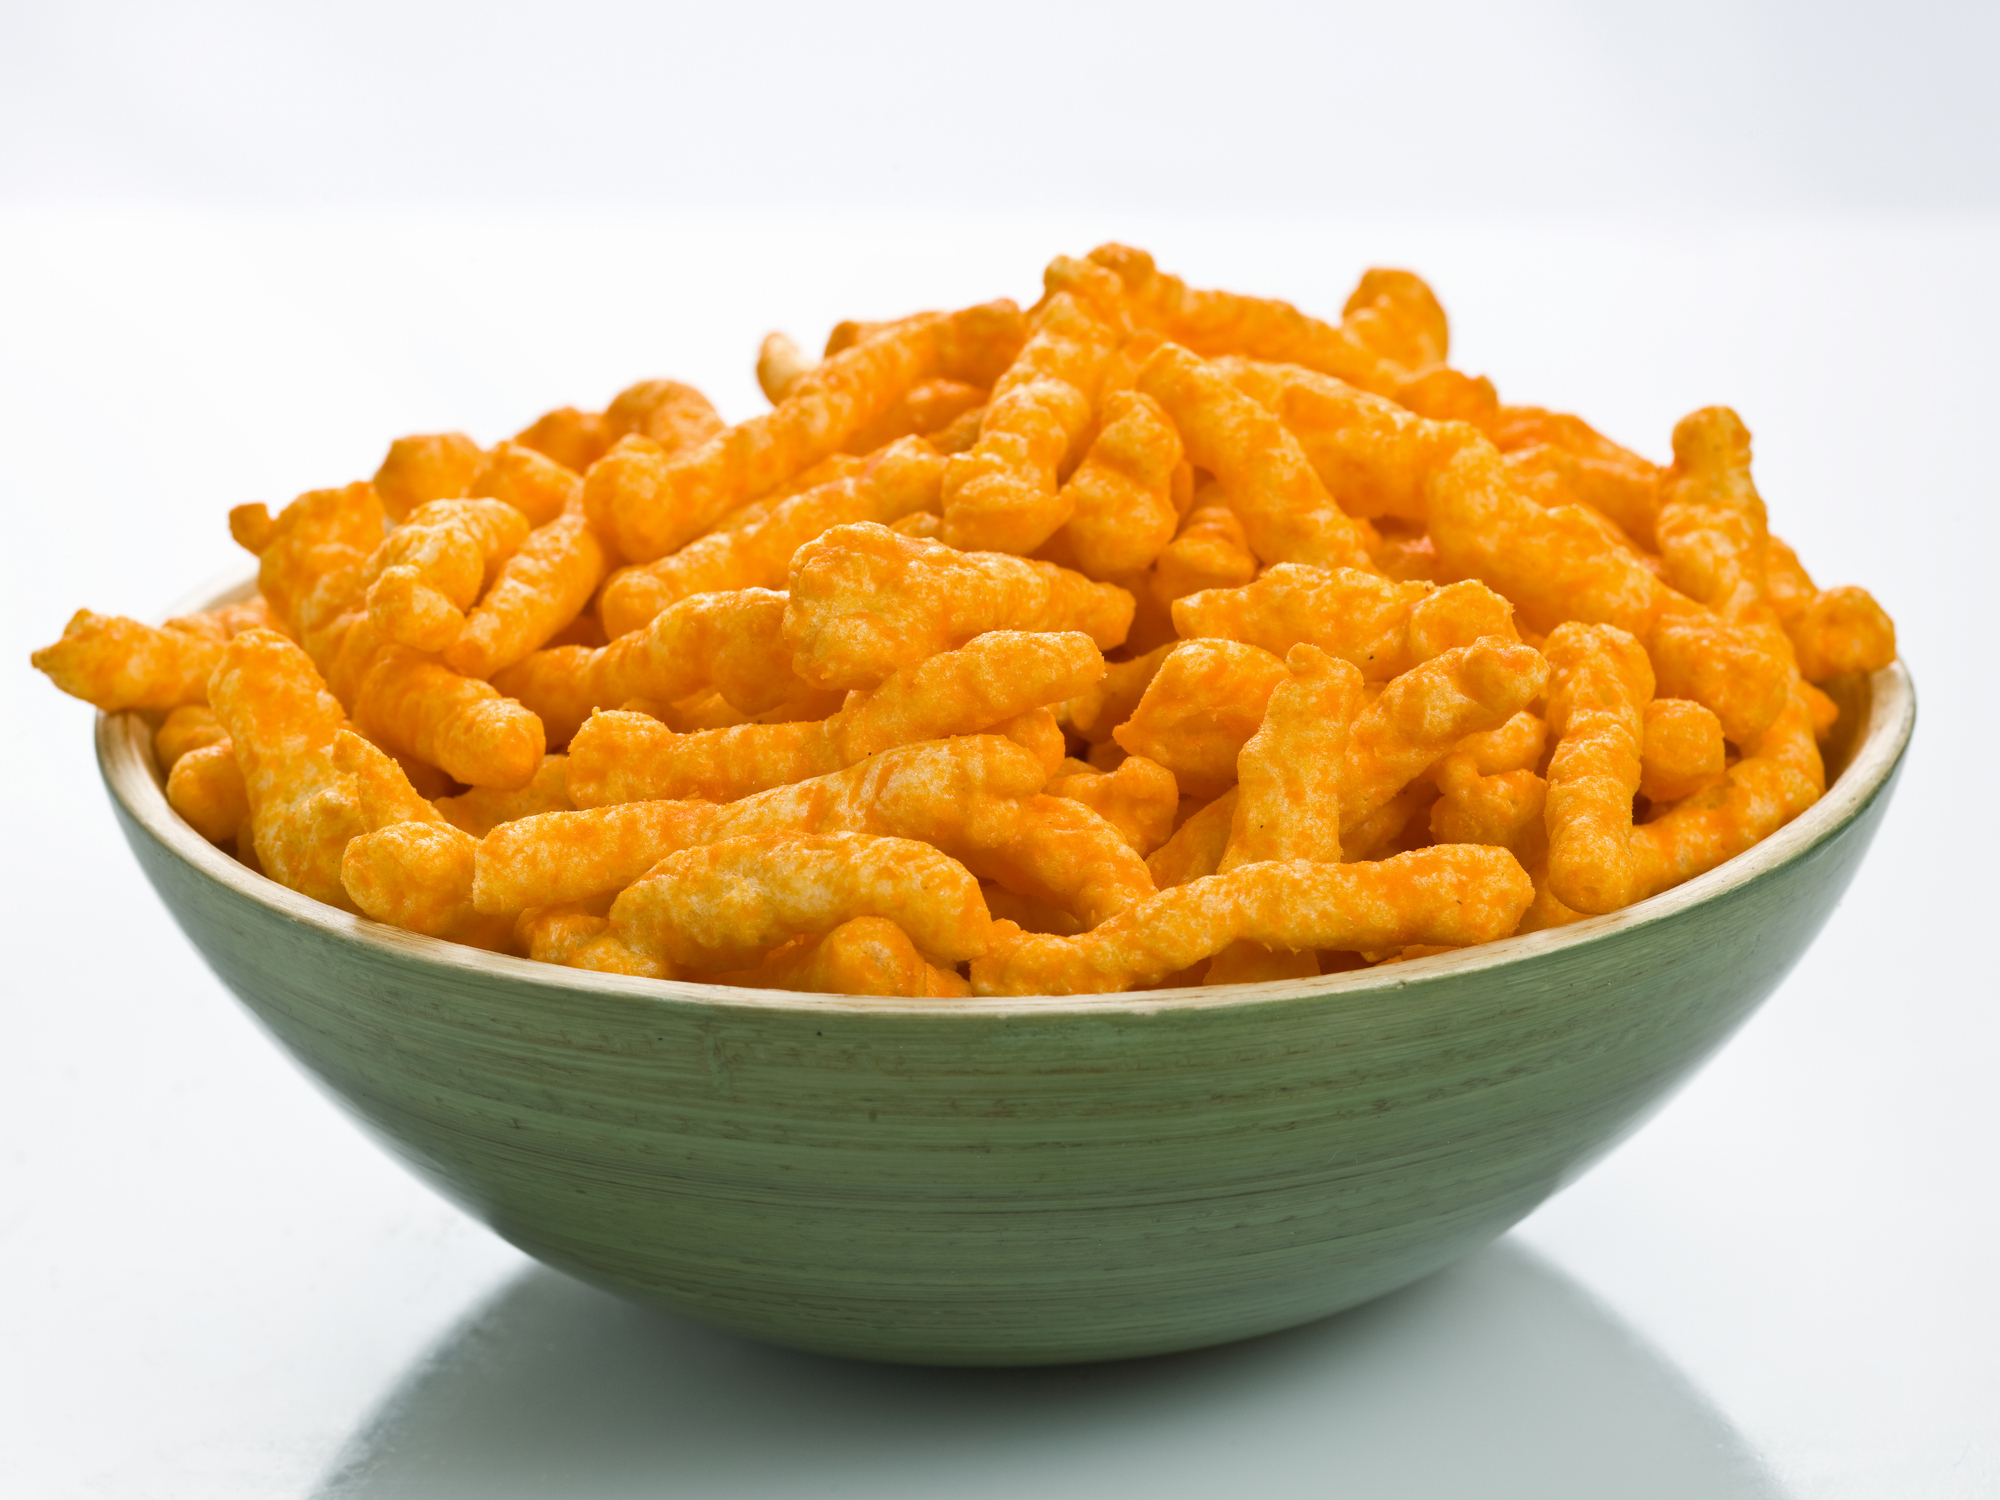 Why Cheetos are the perfect ‘food’